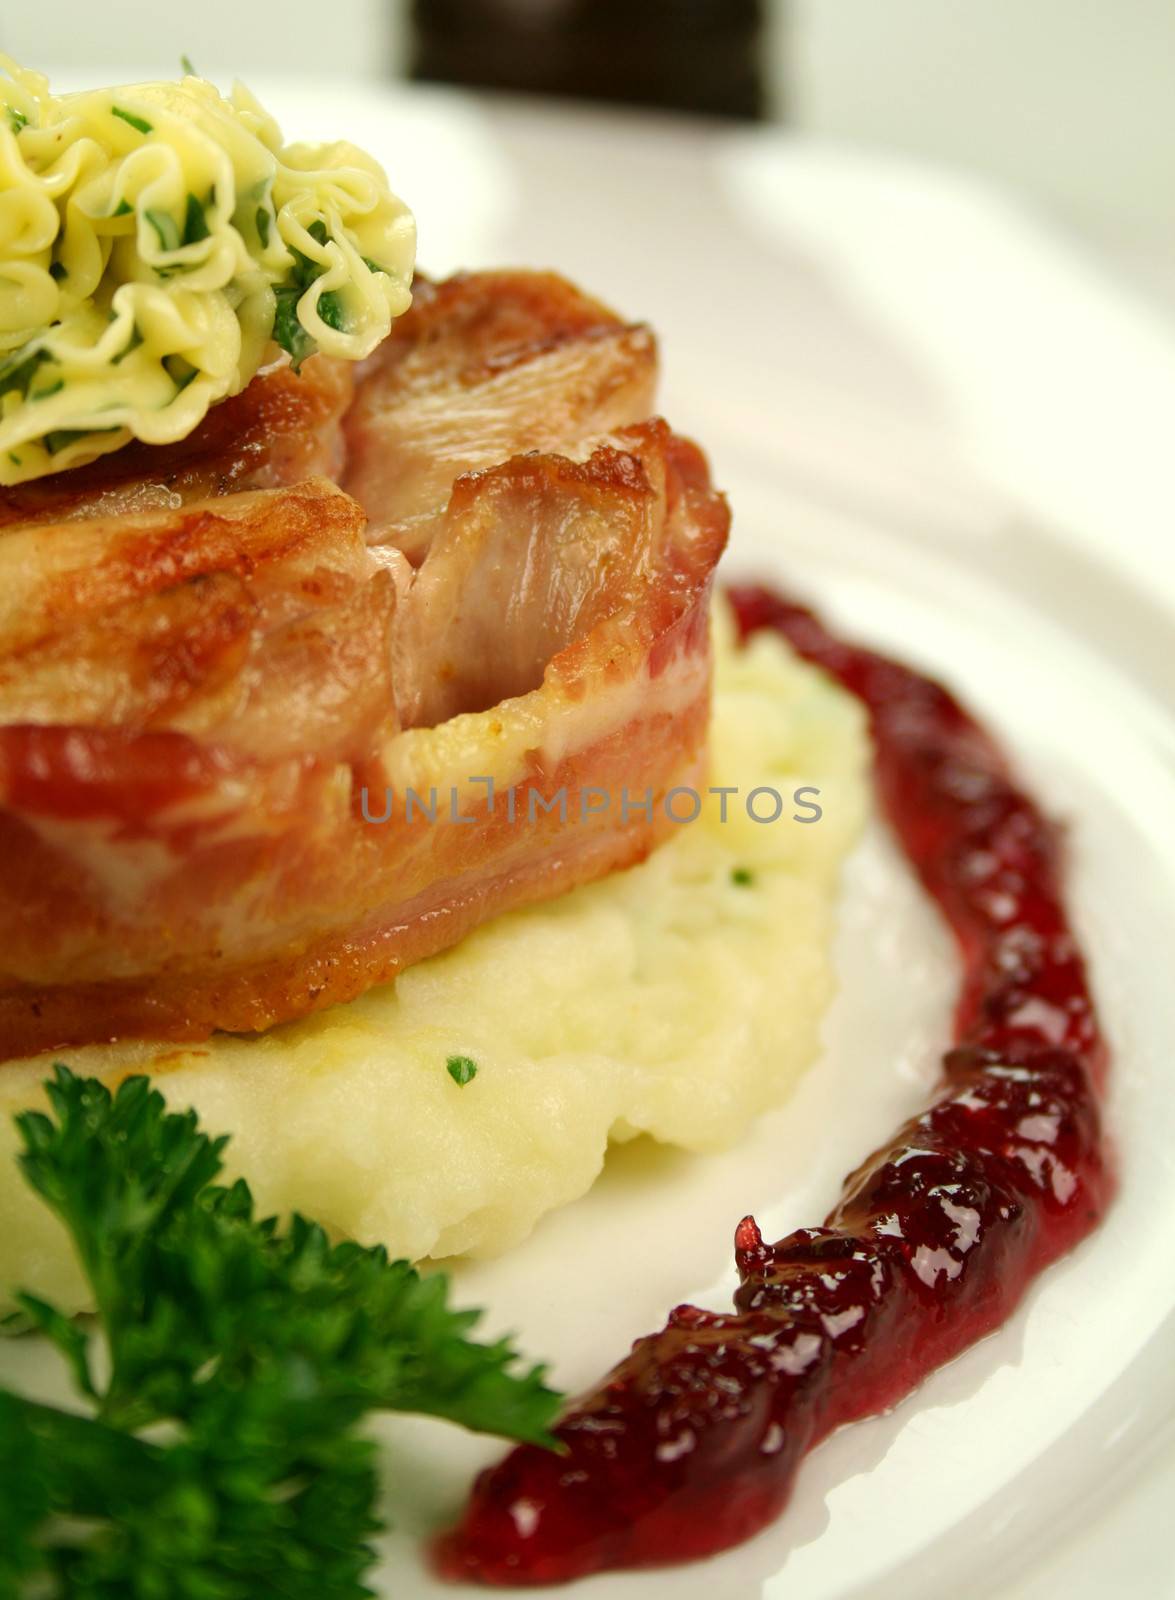 Chicken fillet mignon on parsley mashed potato with a red wine and raspberry jus.